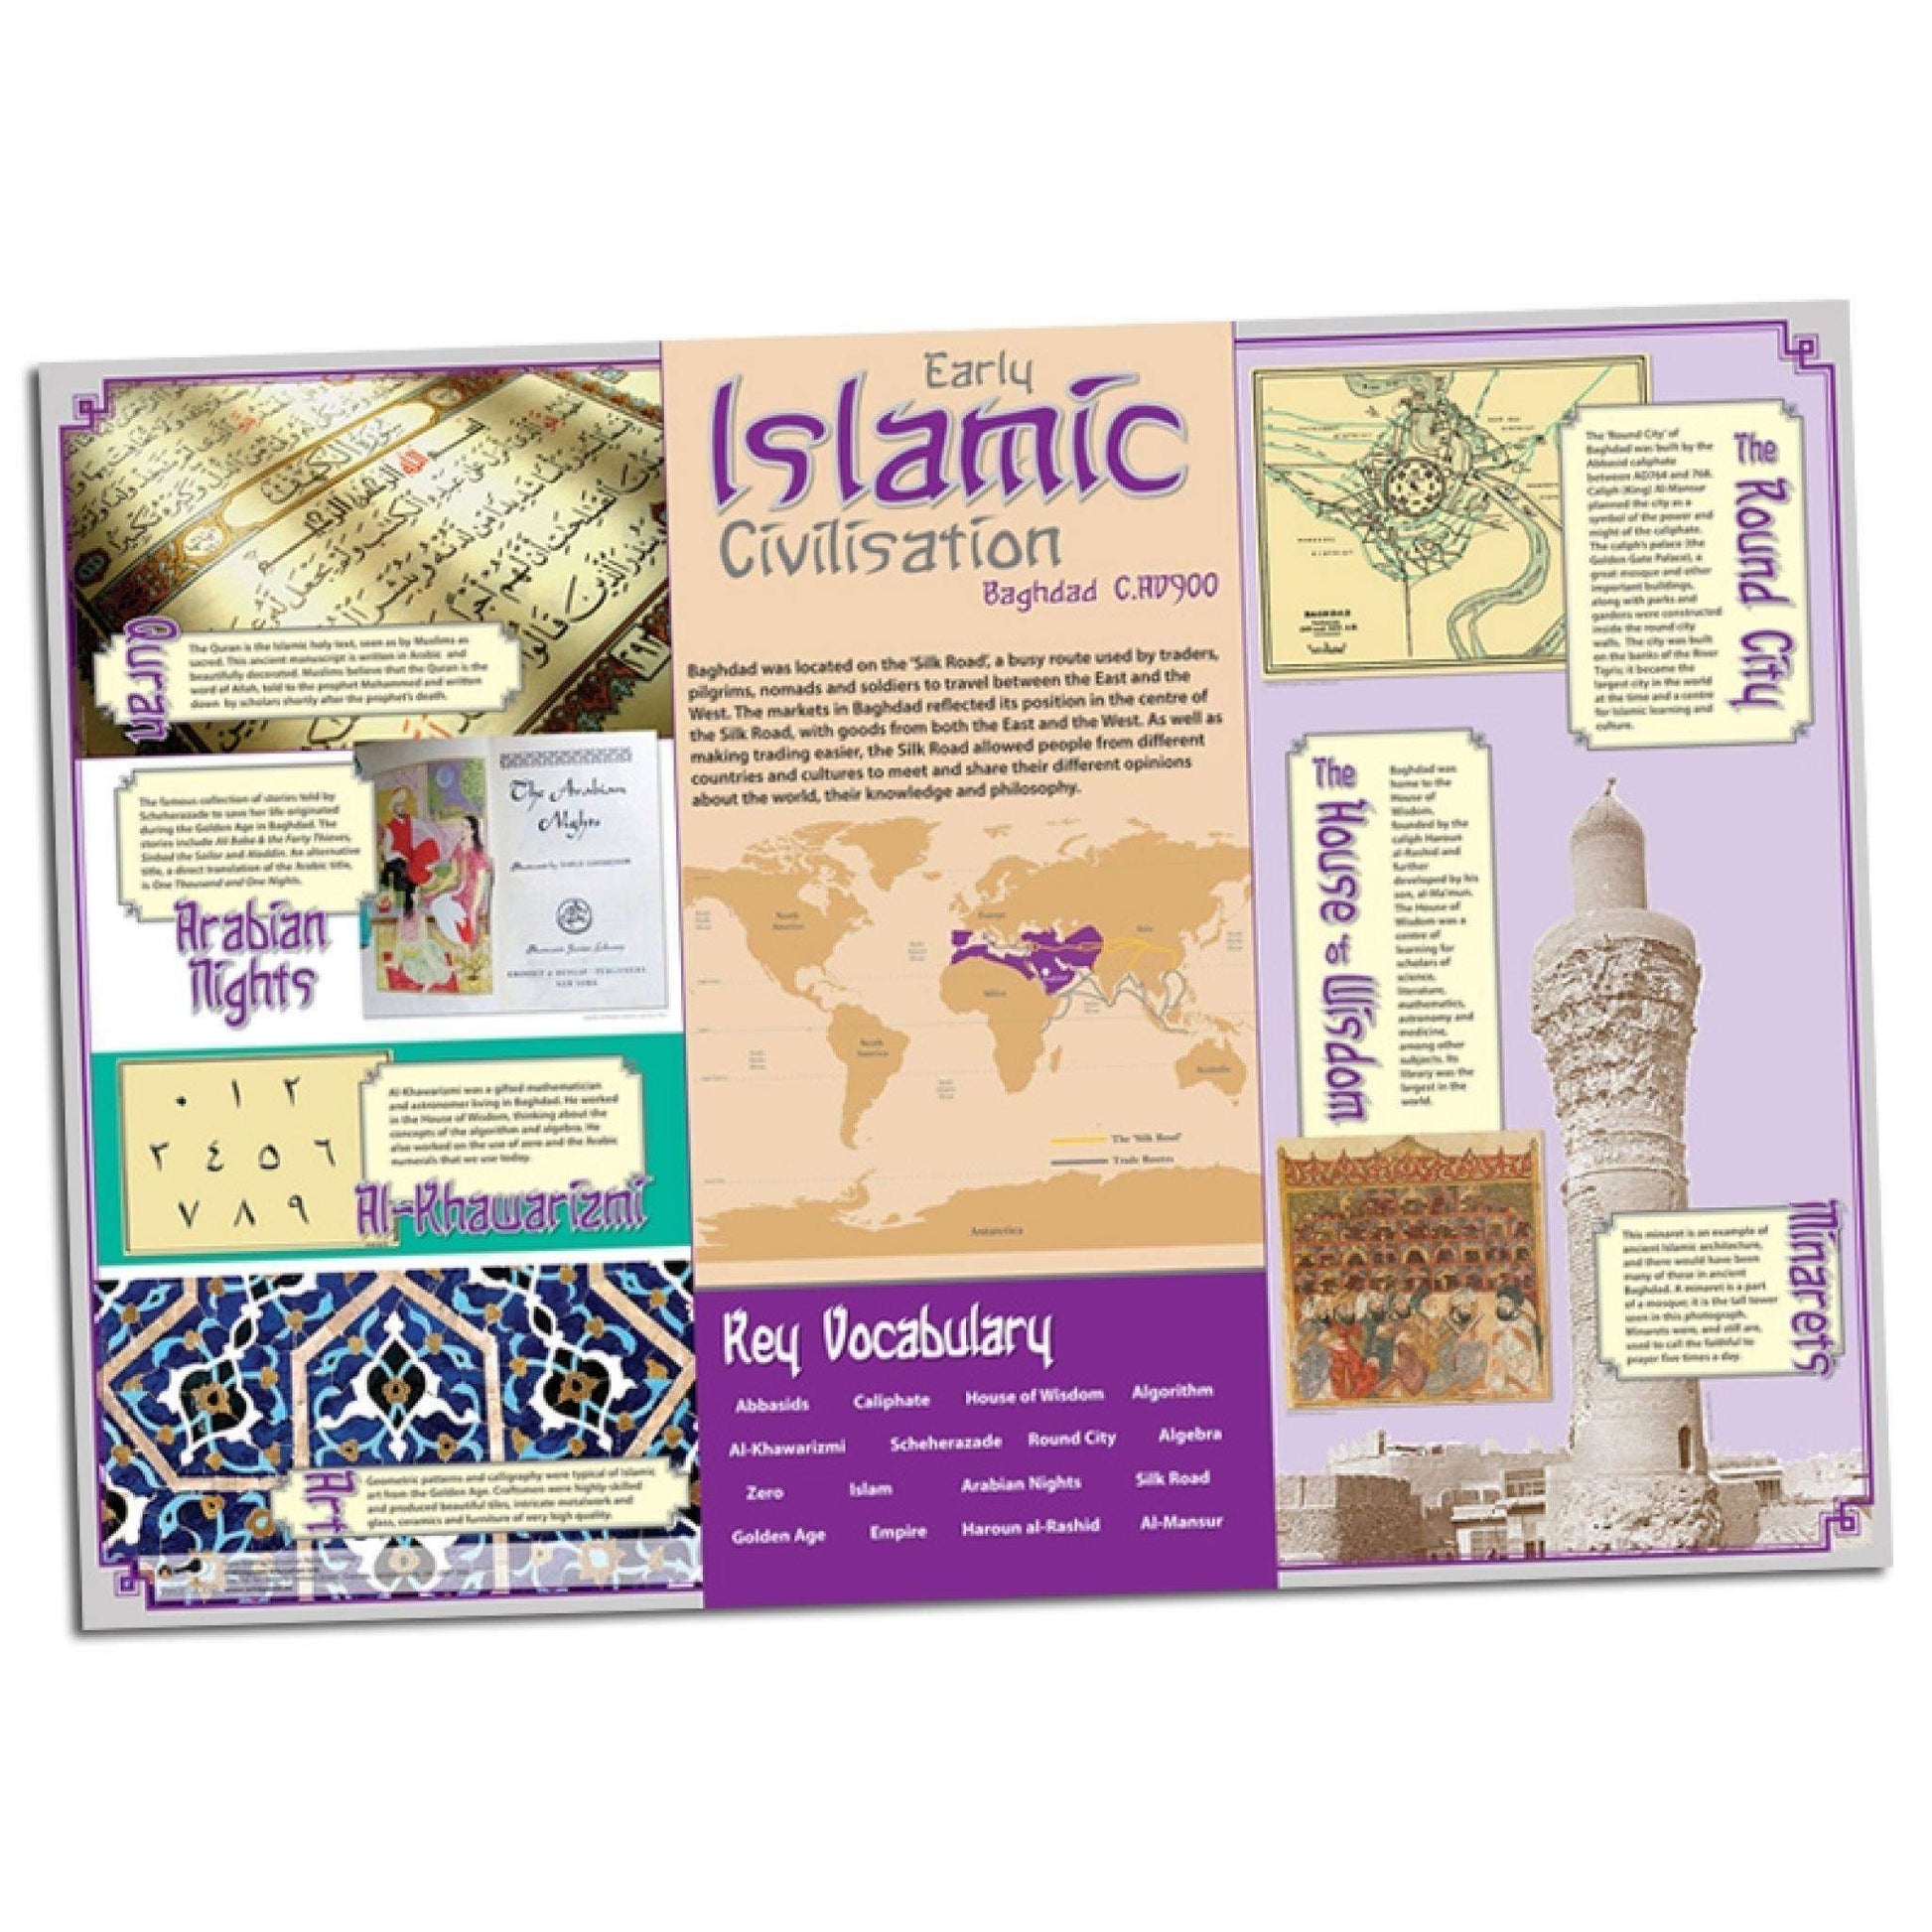 Early Islamic Civilisation Classroom Display Poster:Primary Classroom Resources